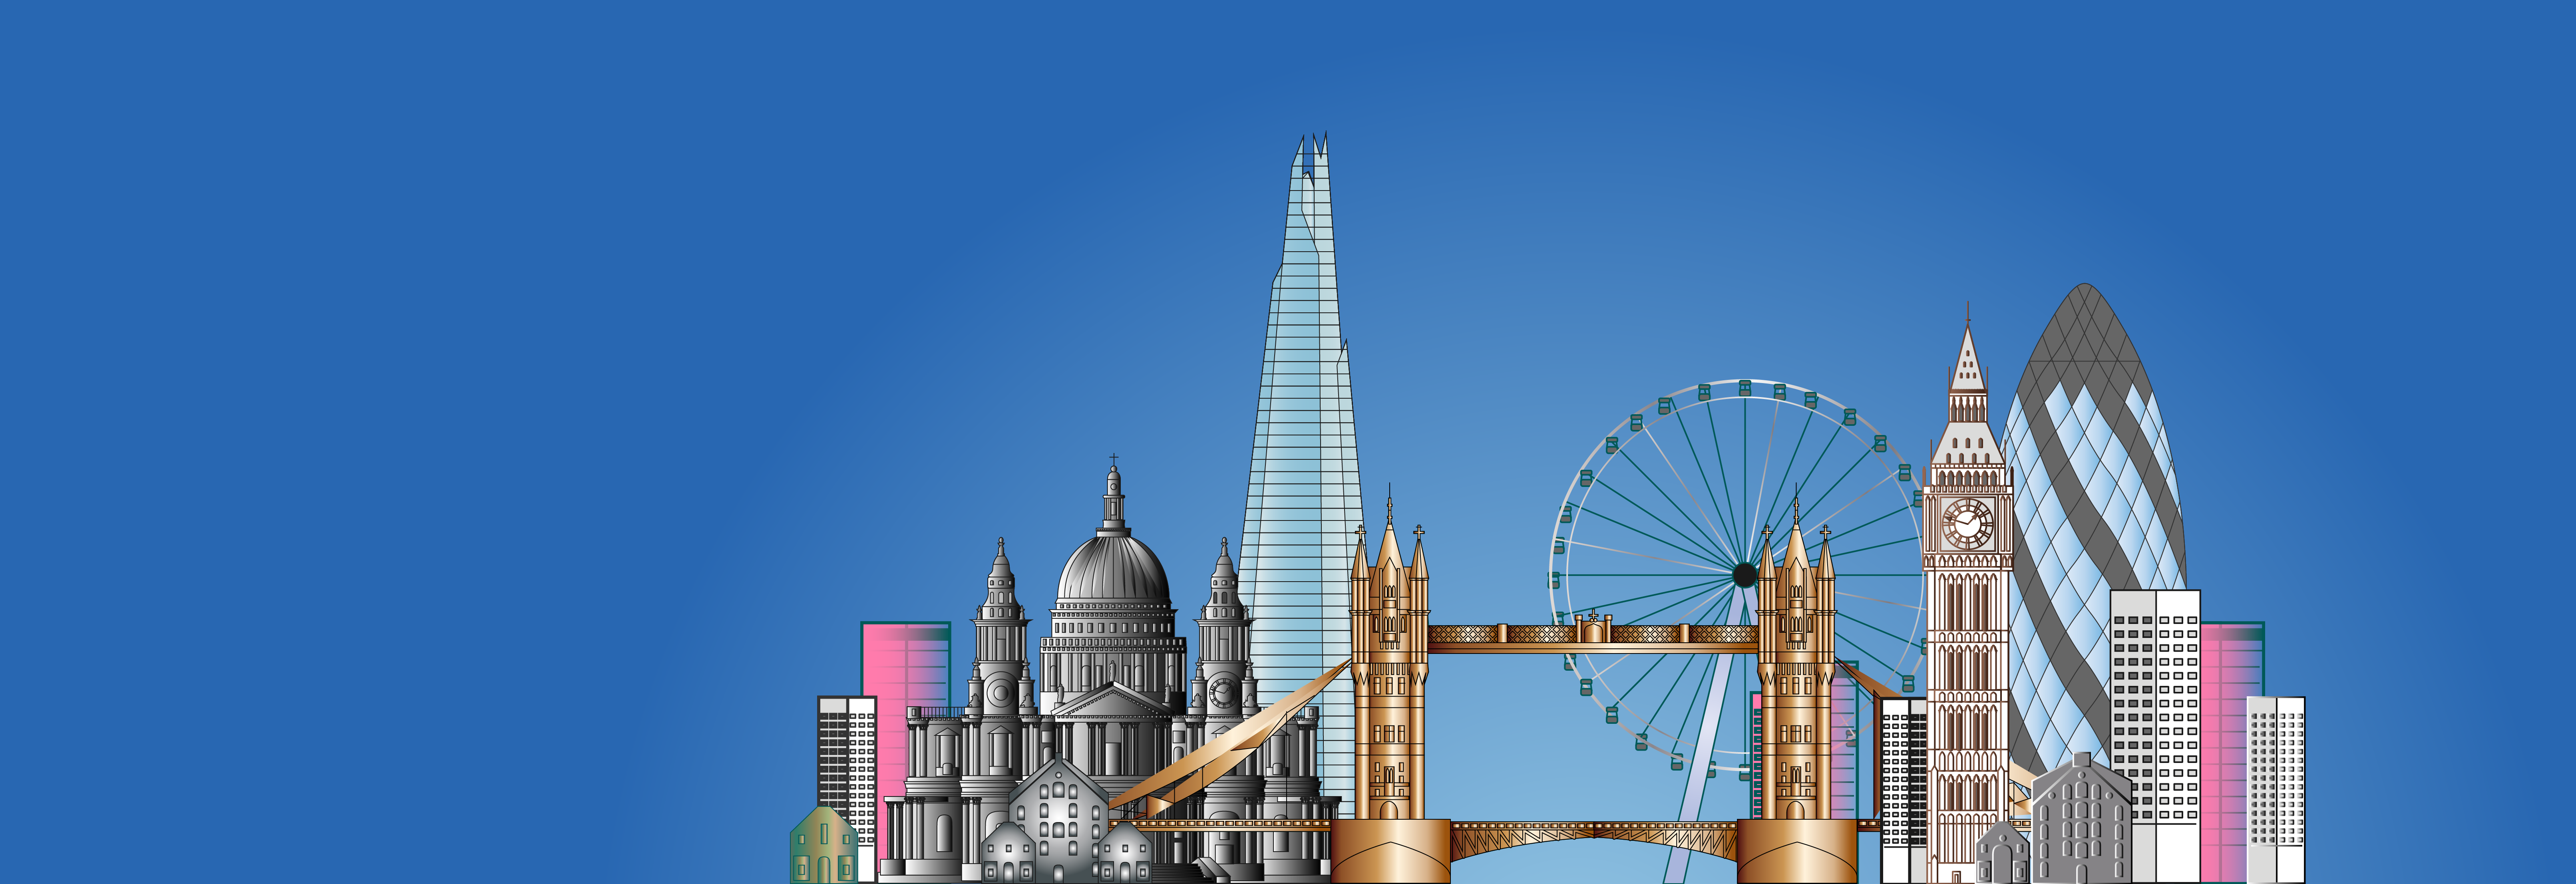 Animation of London's most popular attraction